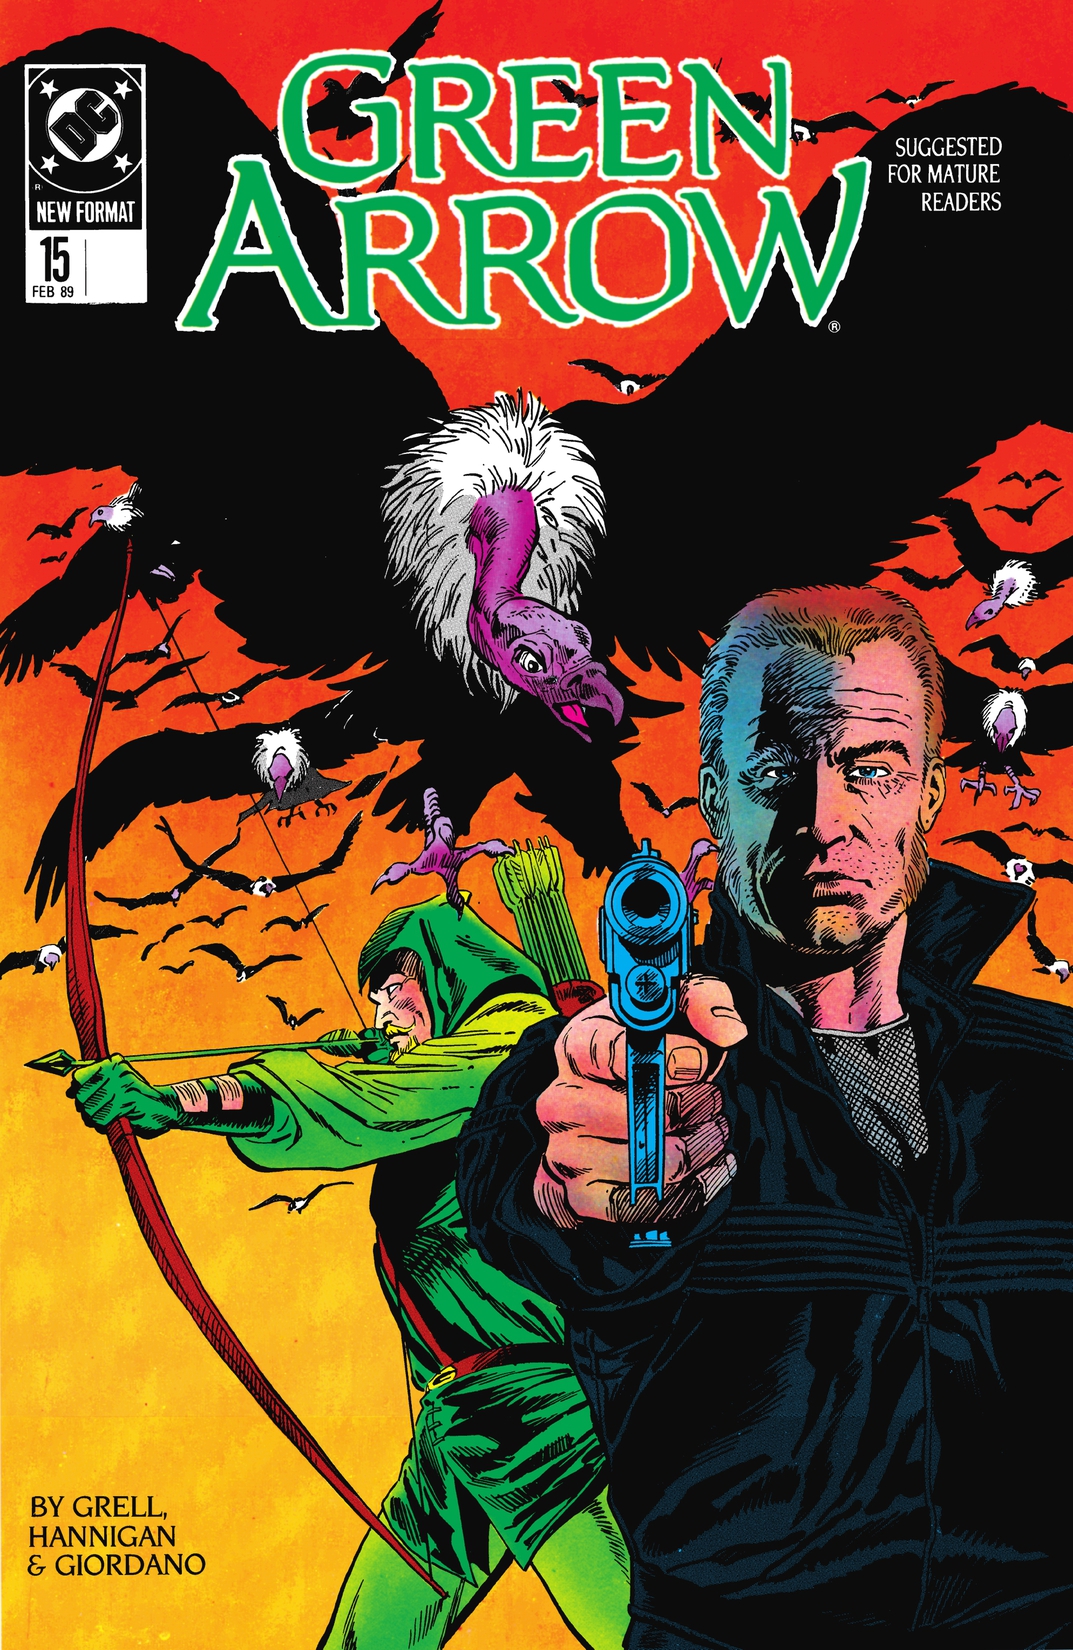 Green Arrow (1987-) #15 preview images